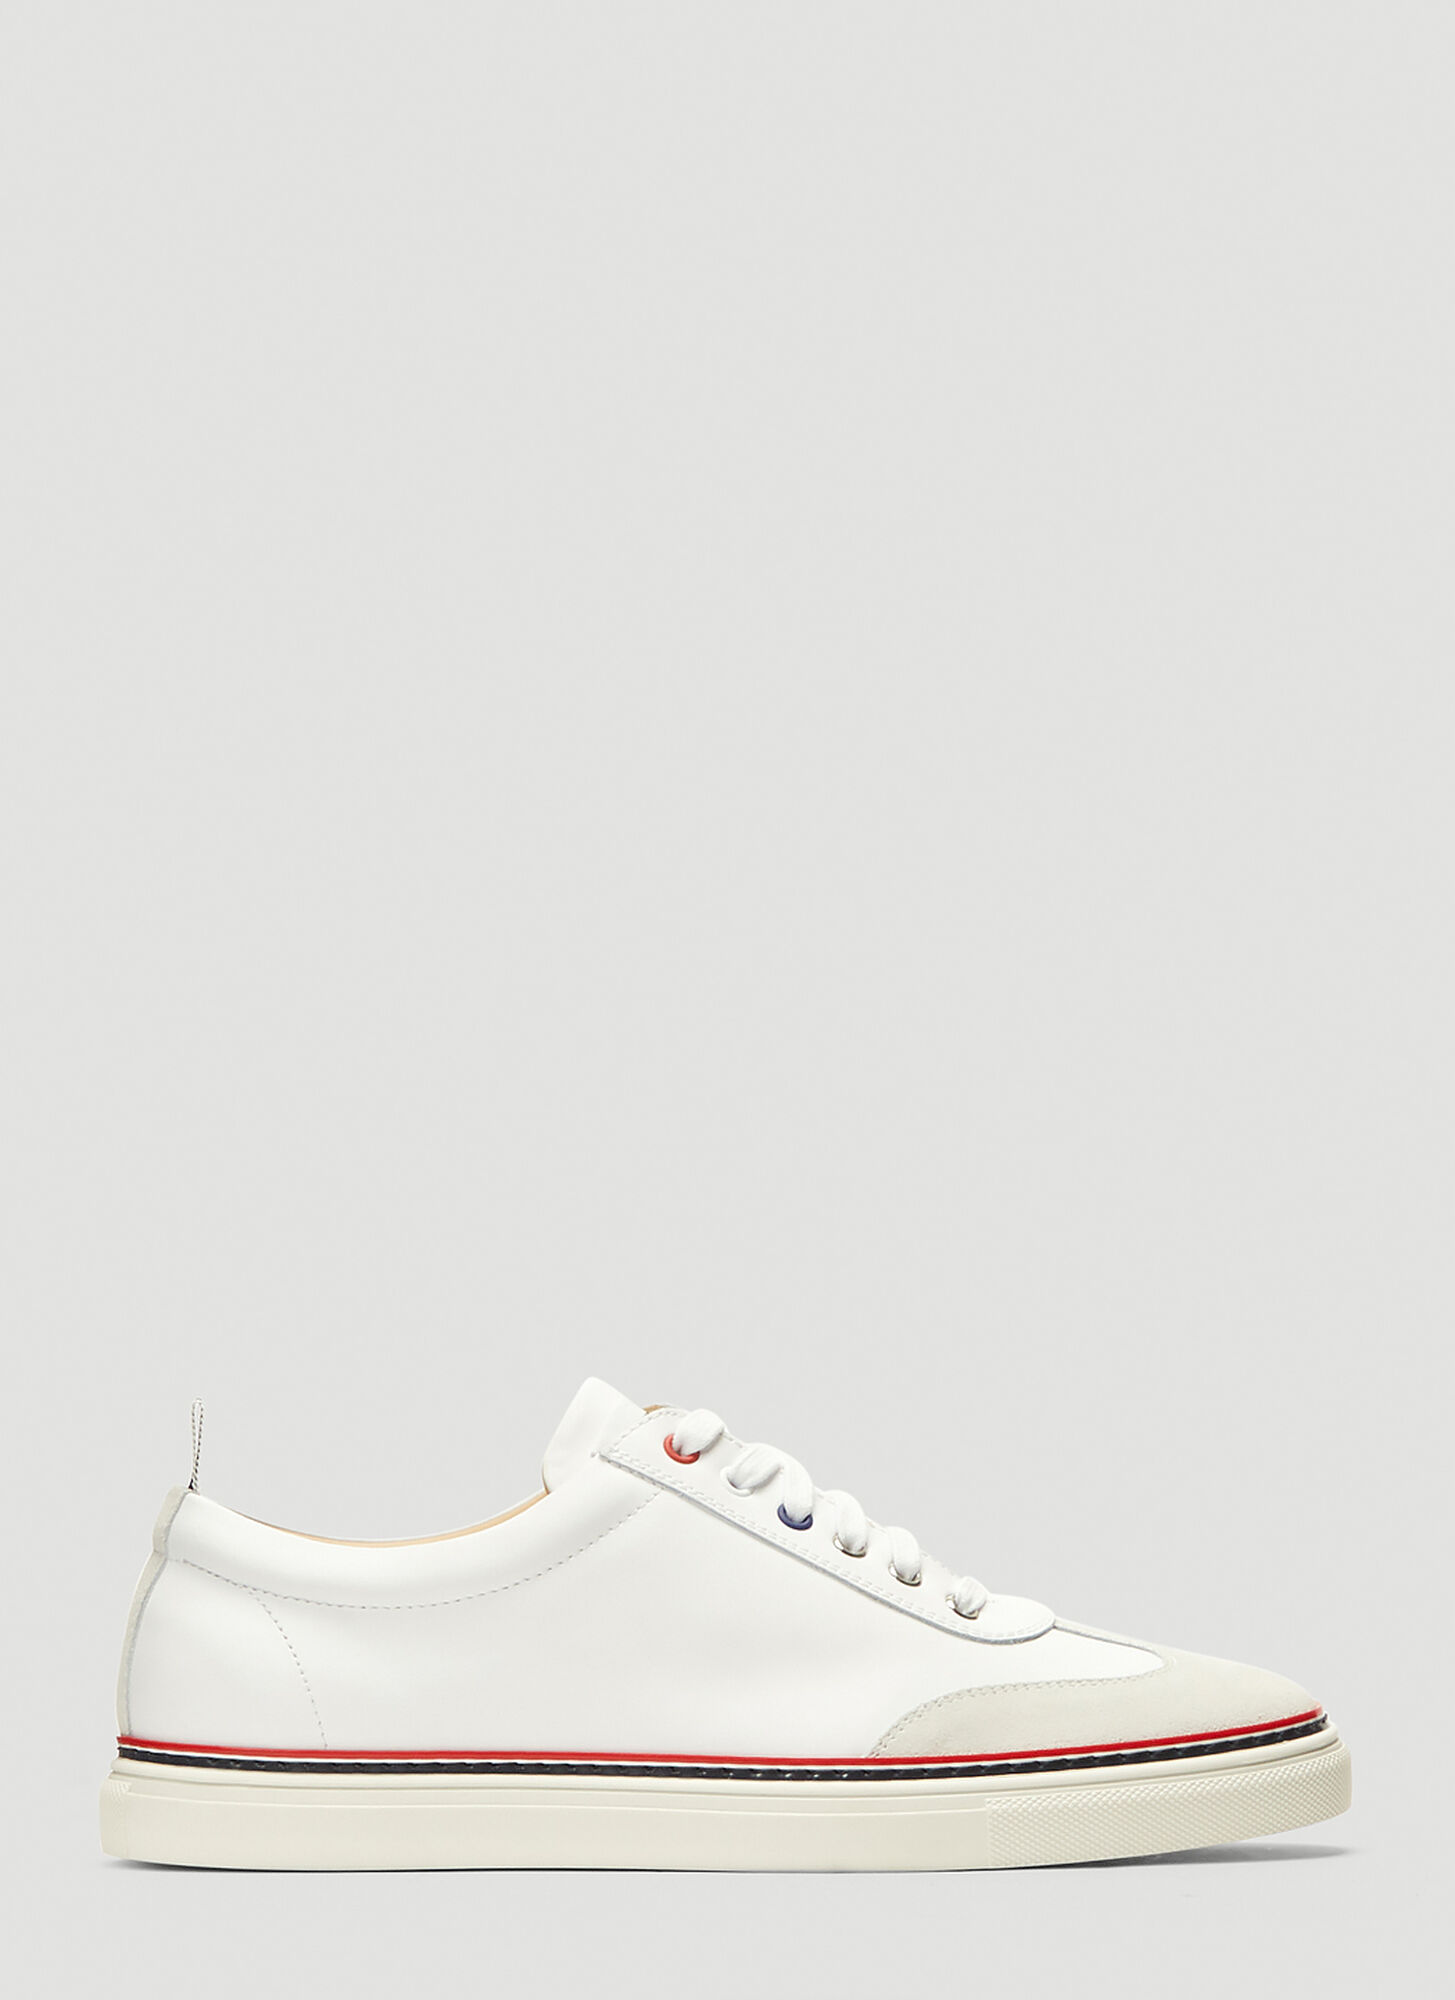 Thom Browne Leather Sneakers in White size US - 12 | The Fashionisto